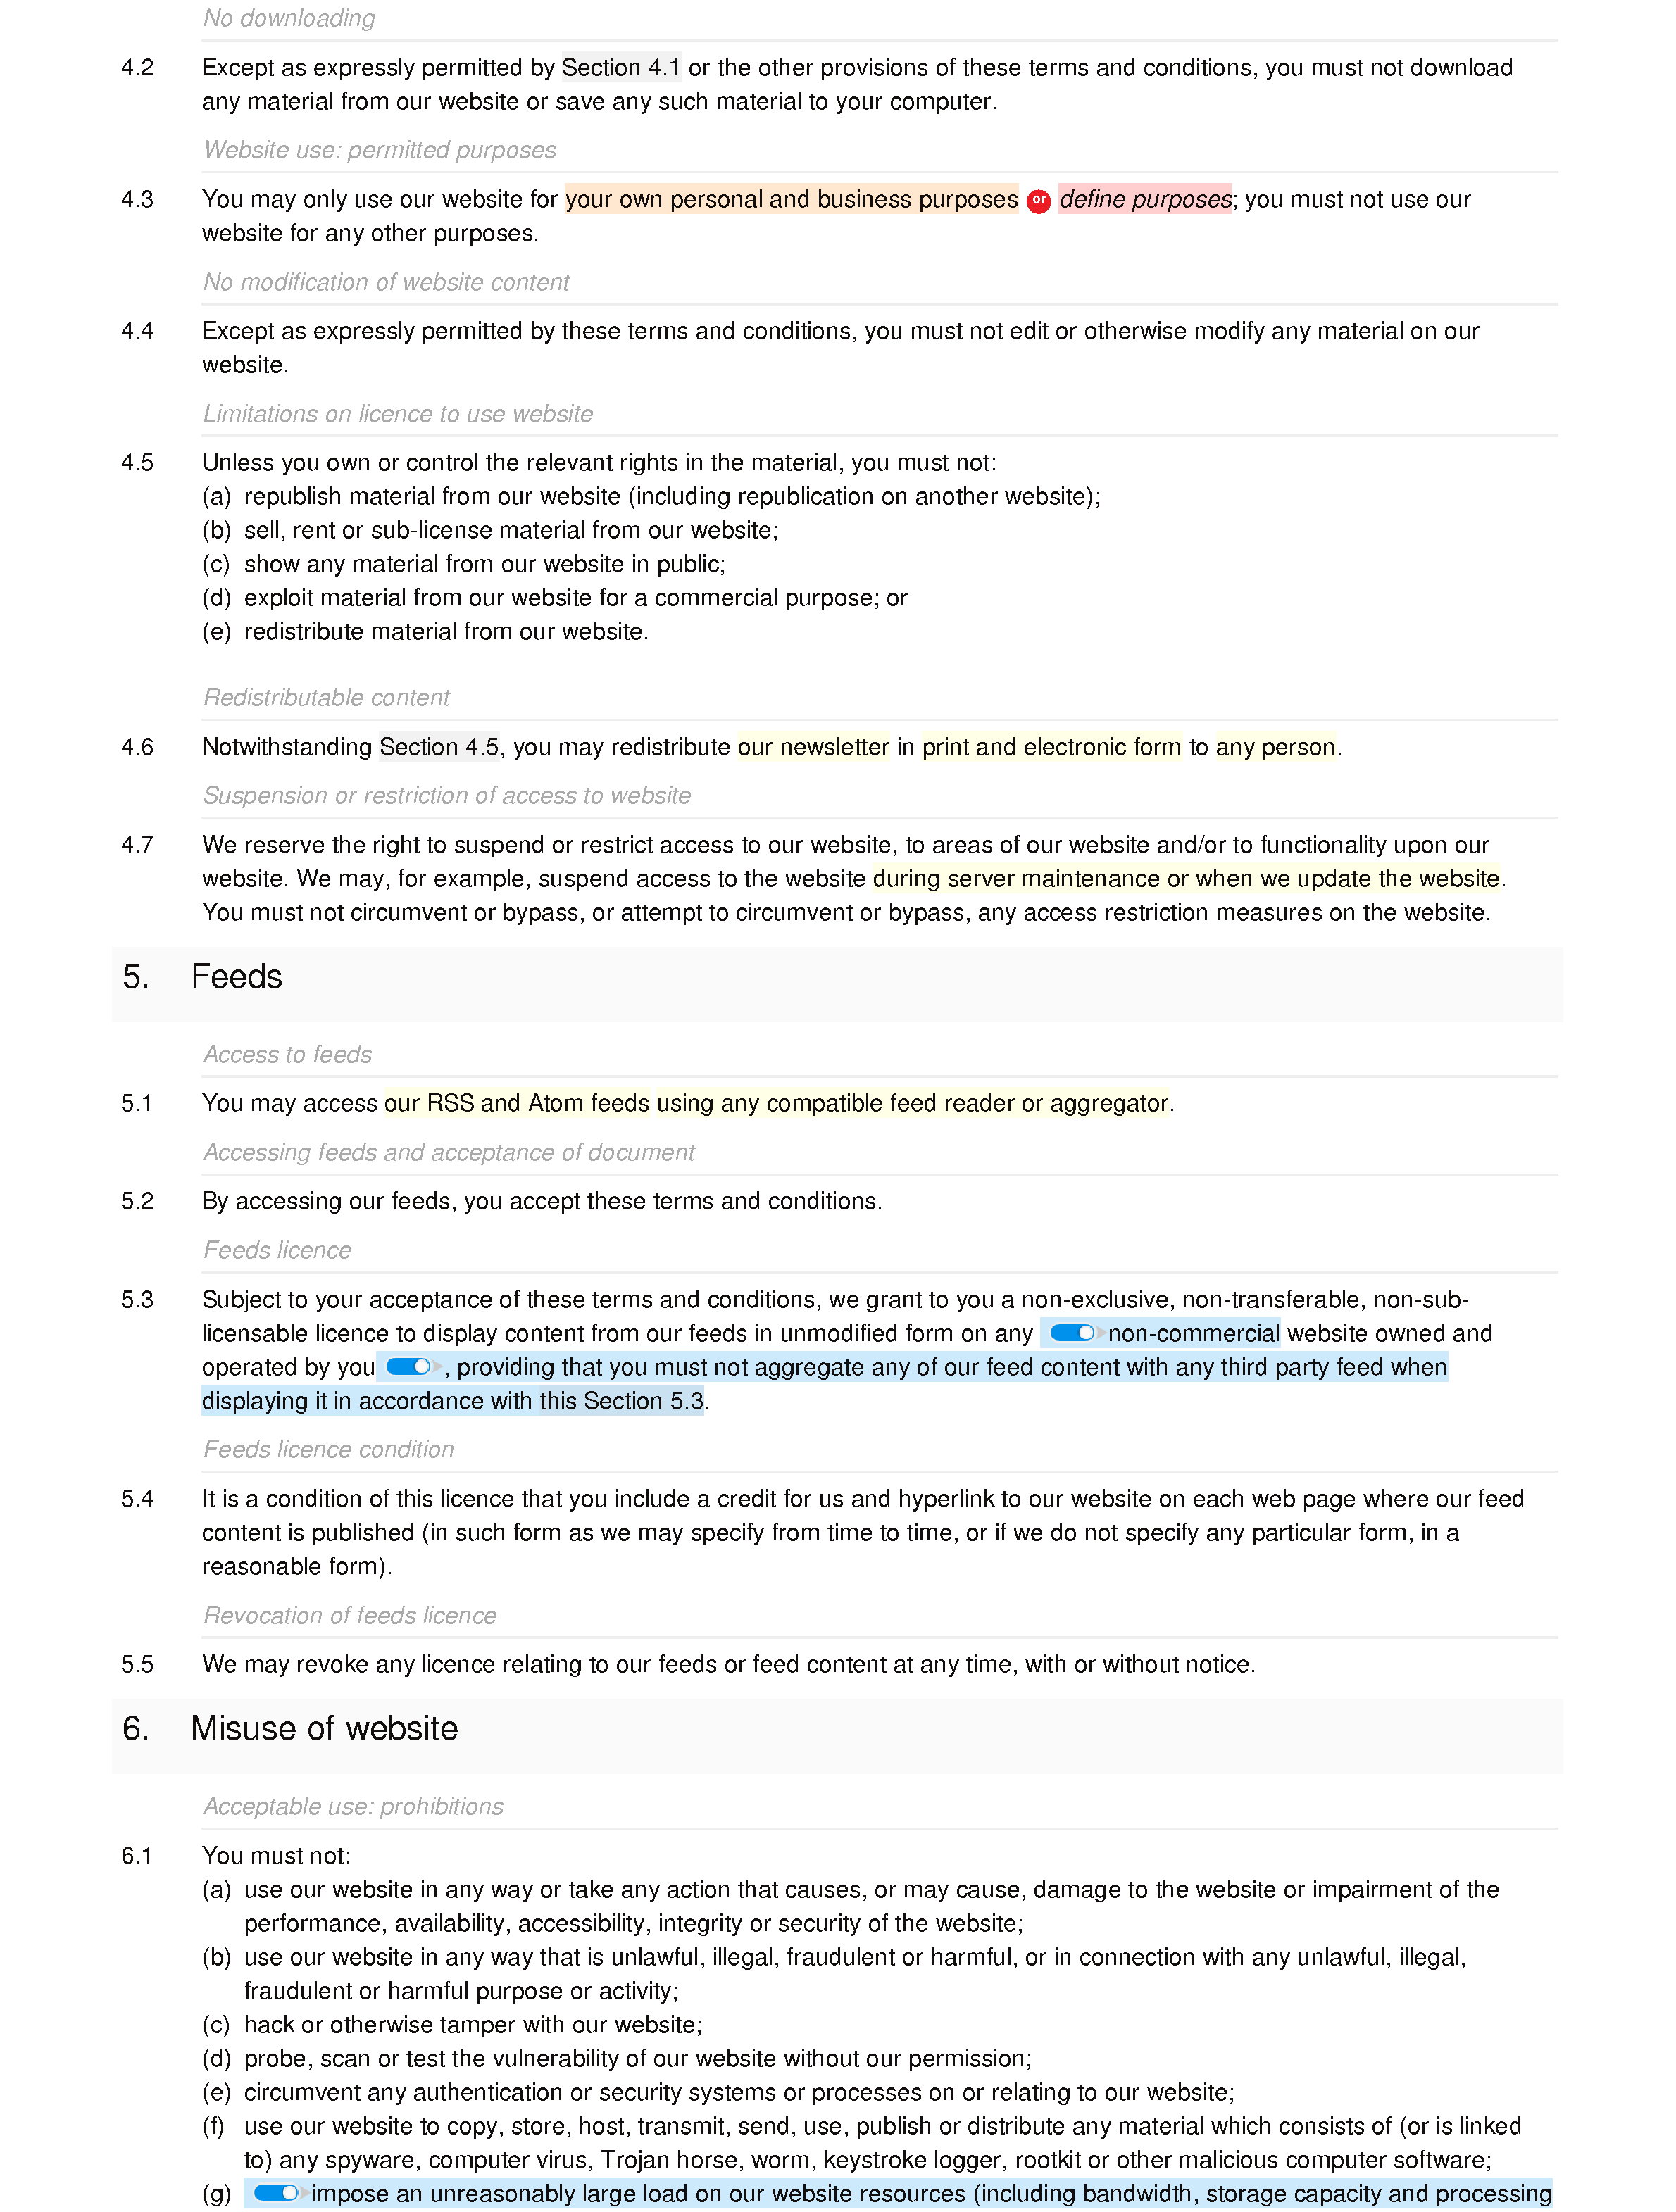 Financial website terms and conditions document editor preview